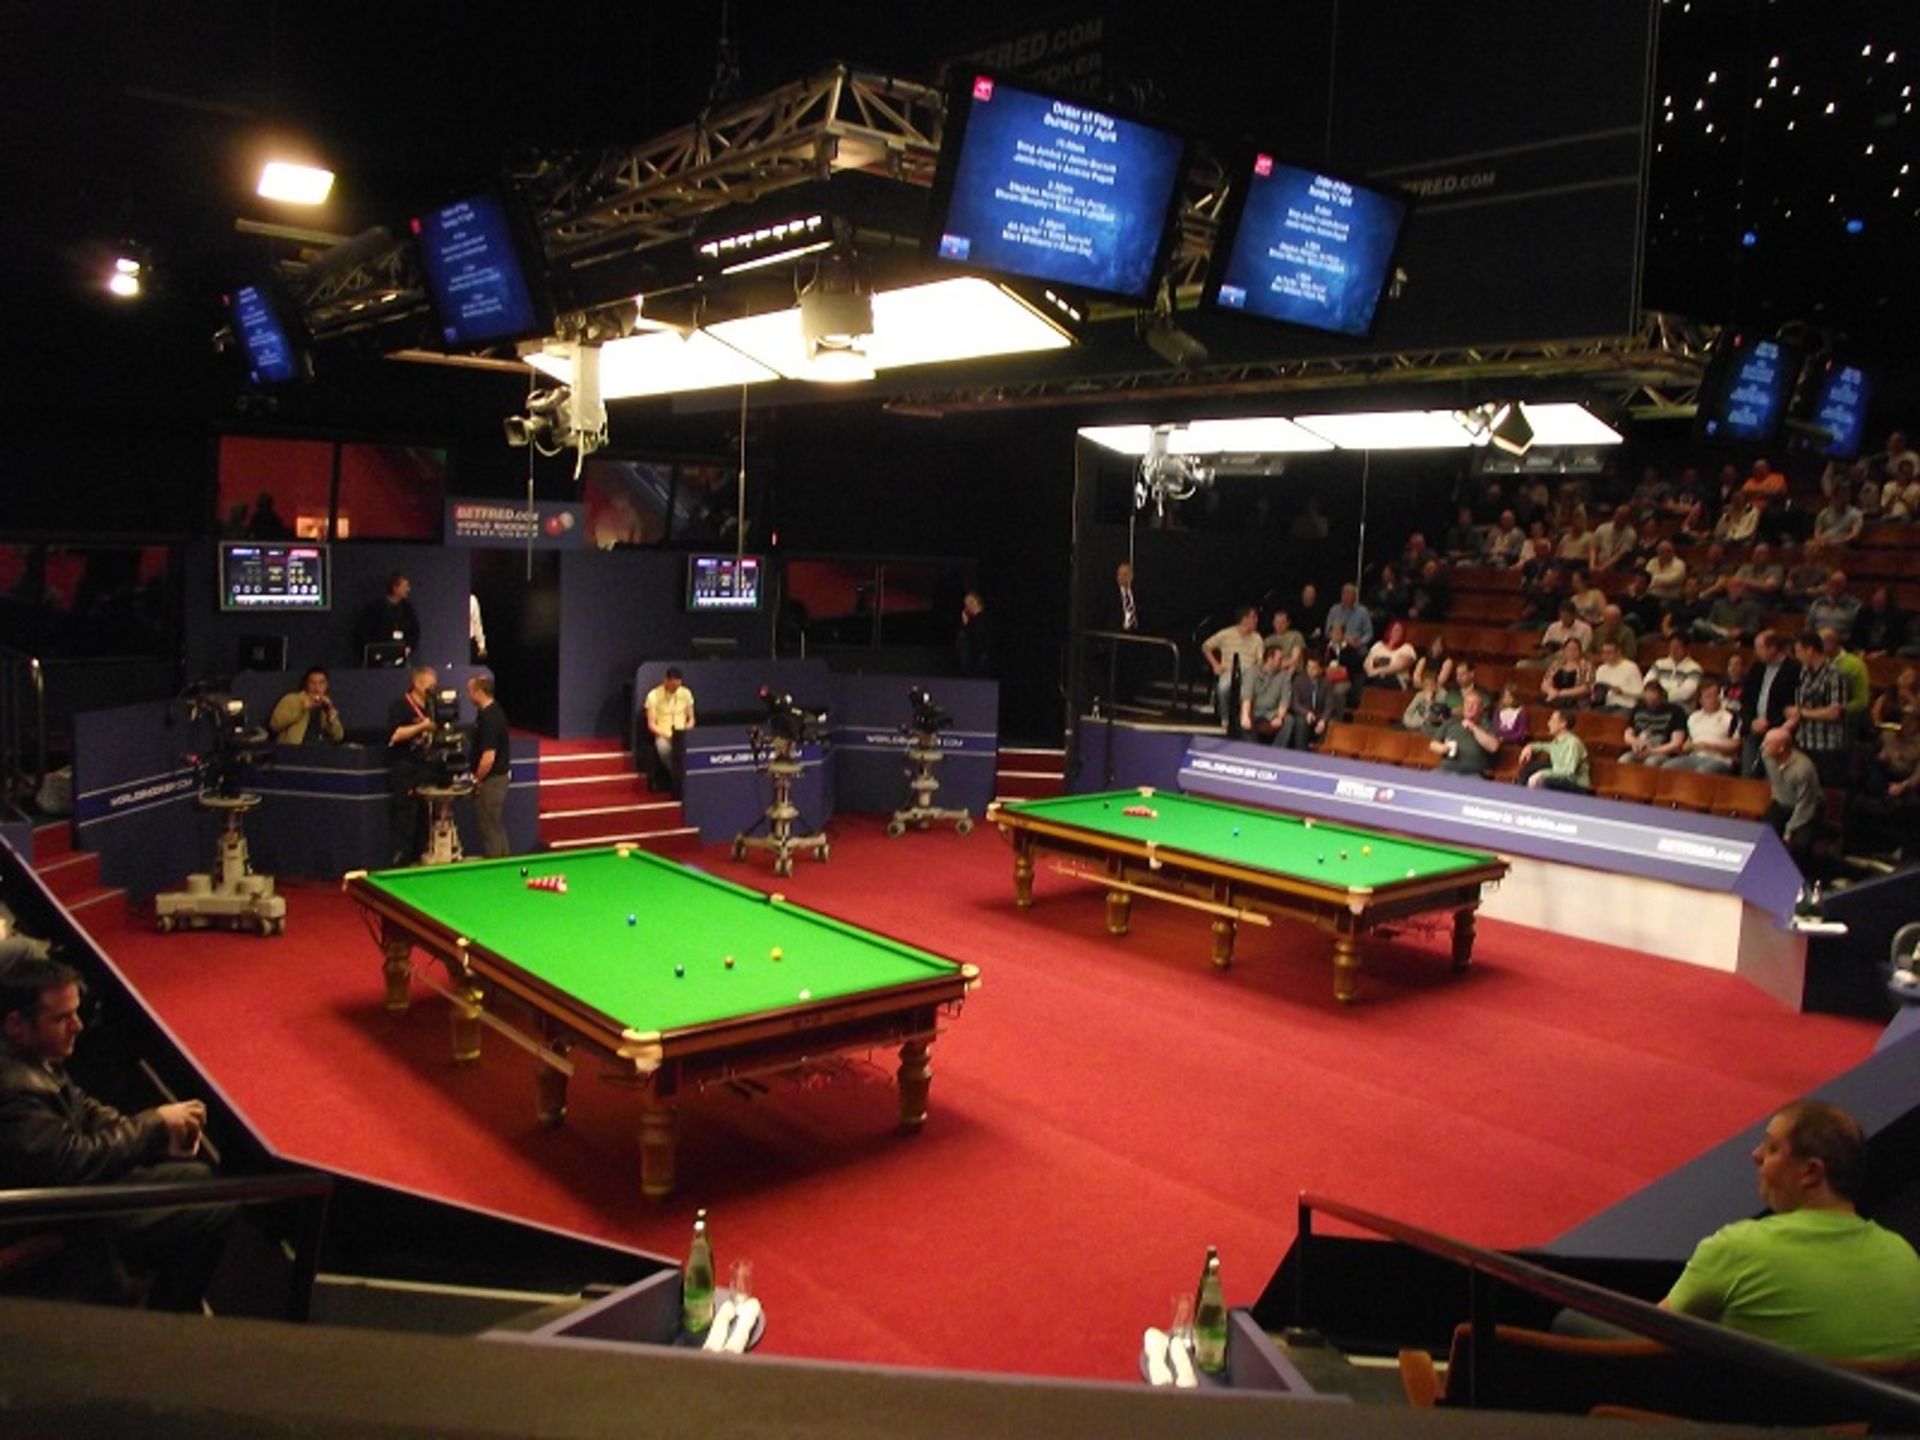 Guests of Barry Hearn and World Snooker to be VIP Guests at World Snooker Championship Finals 2016 - Image 4 of 4